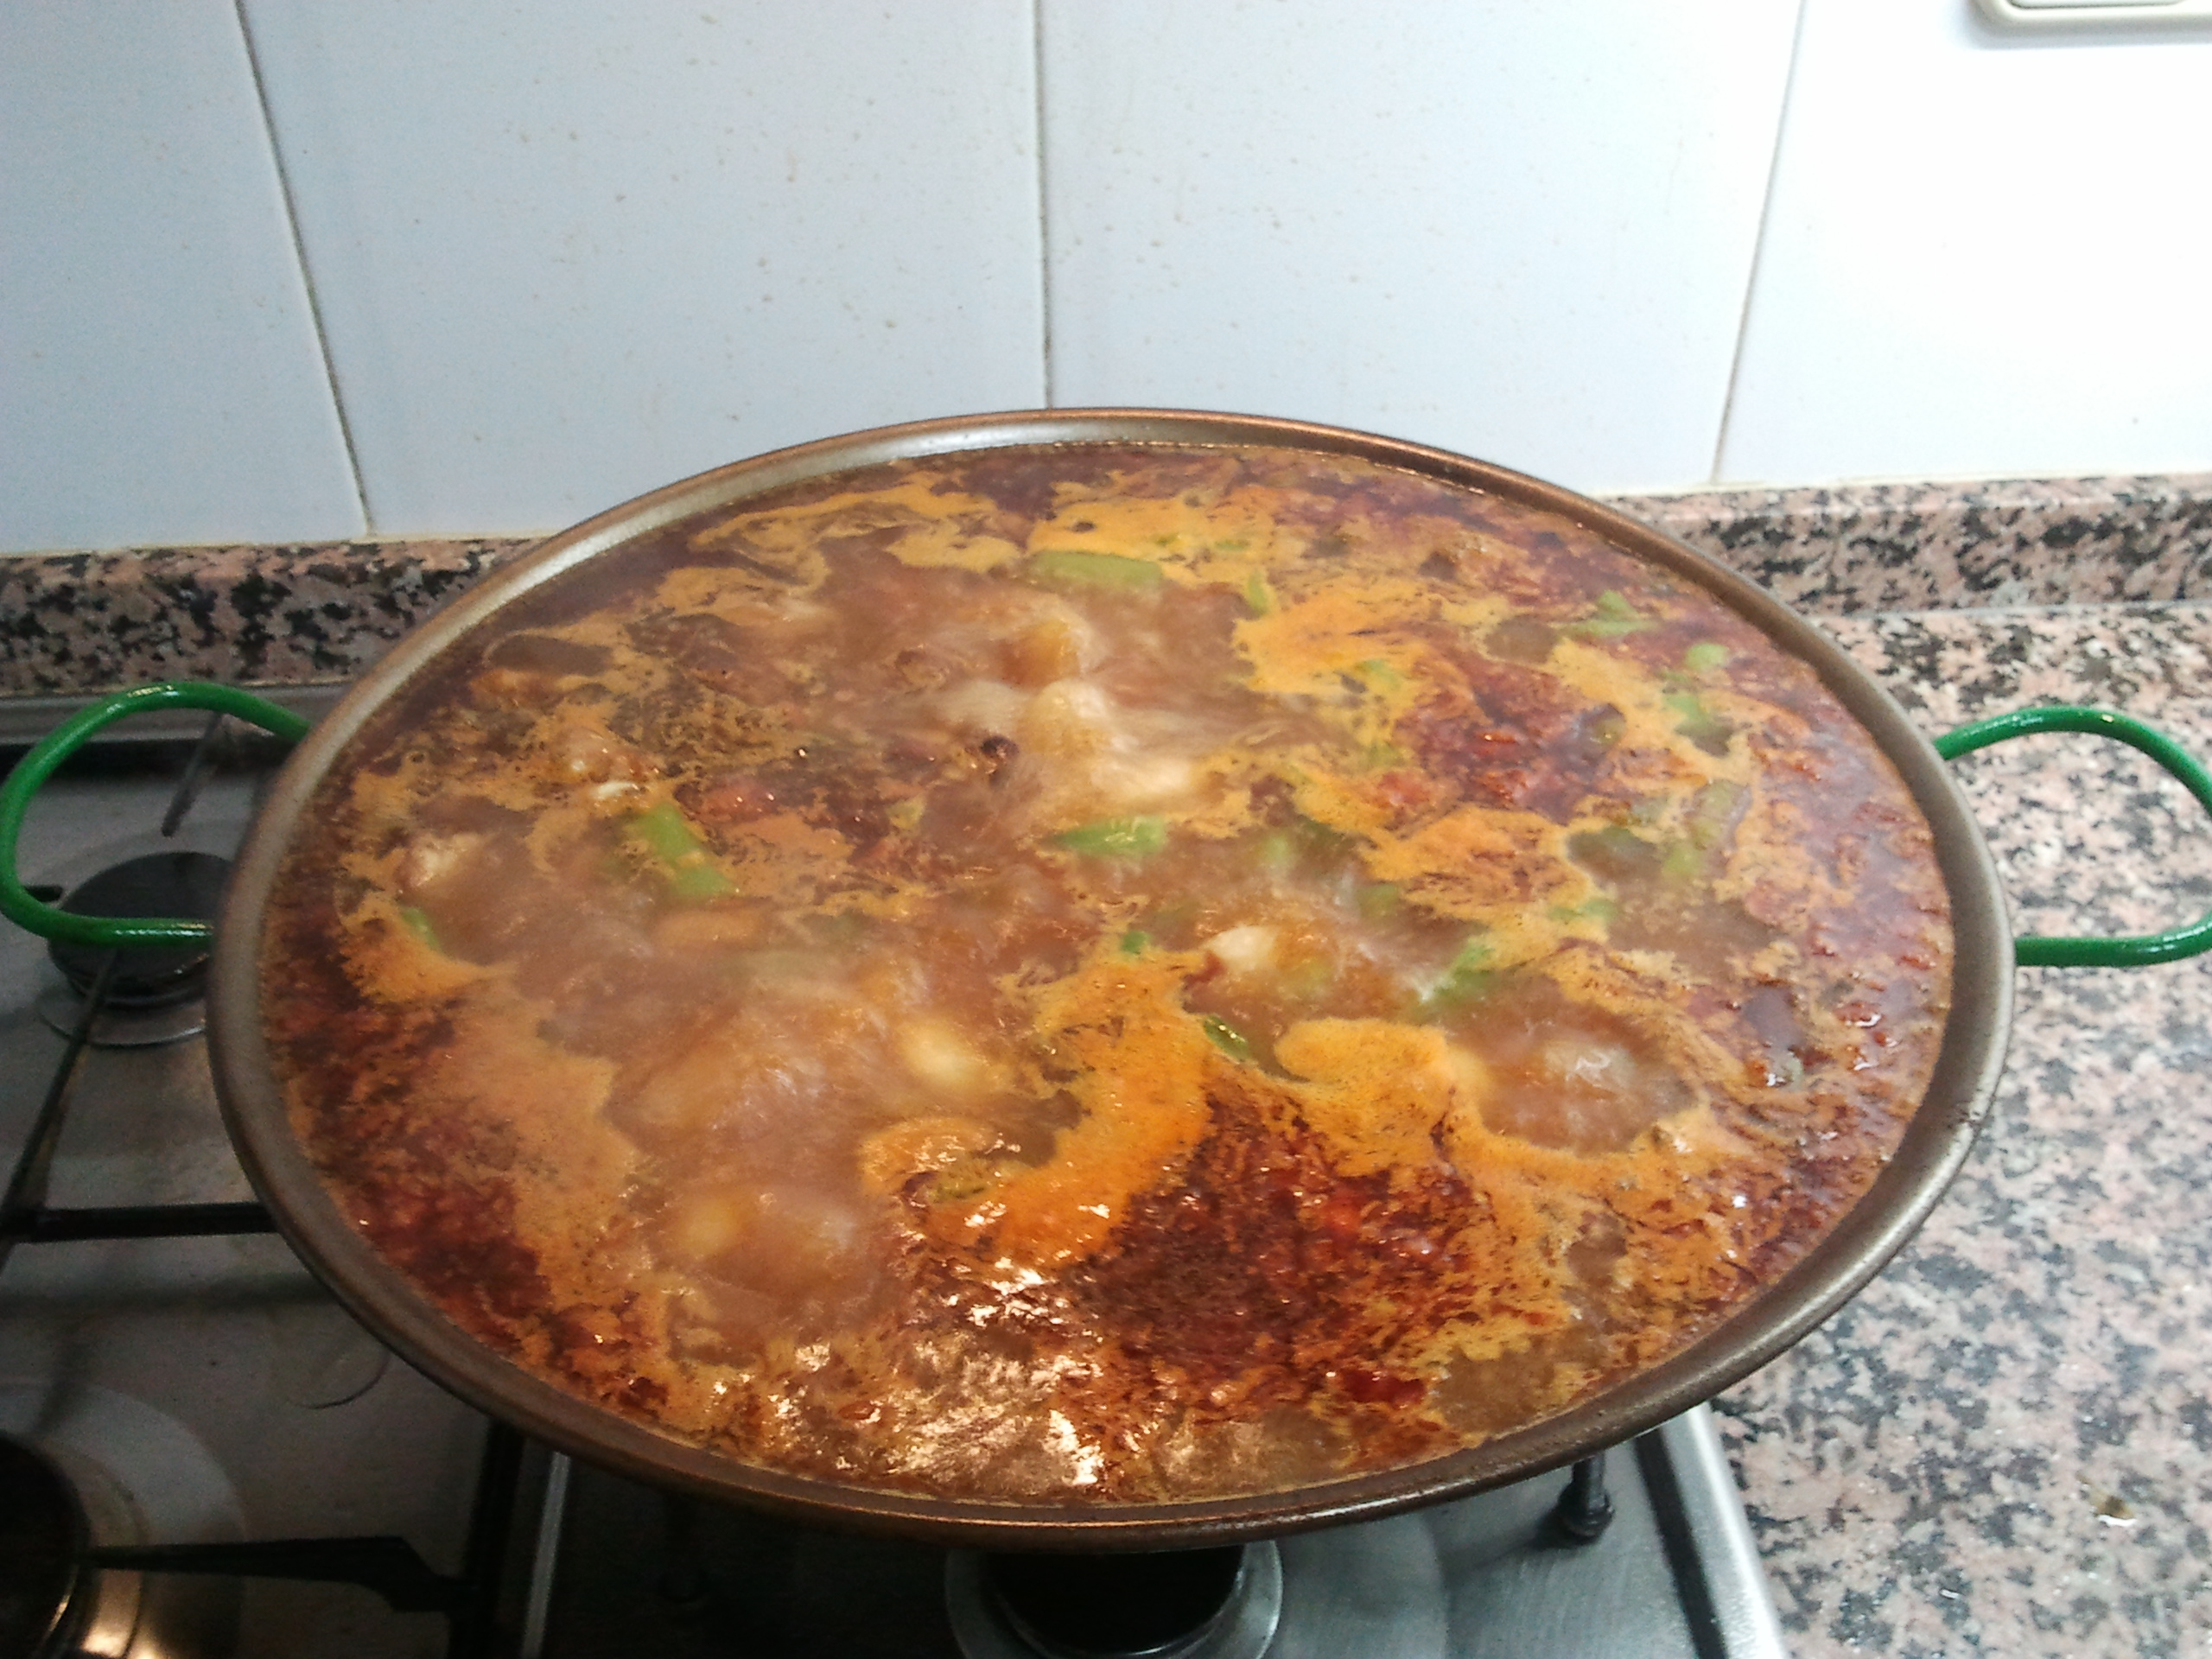 Add water to Paella and let it cook